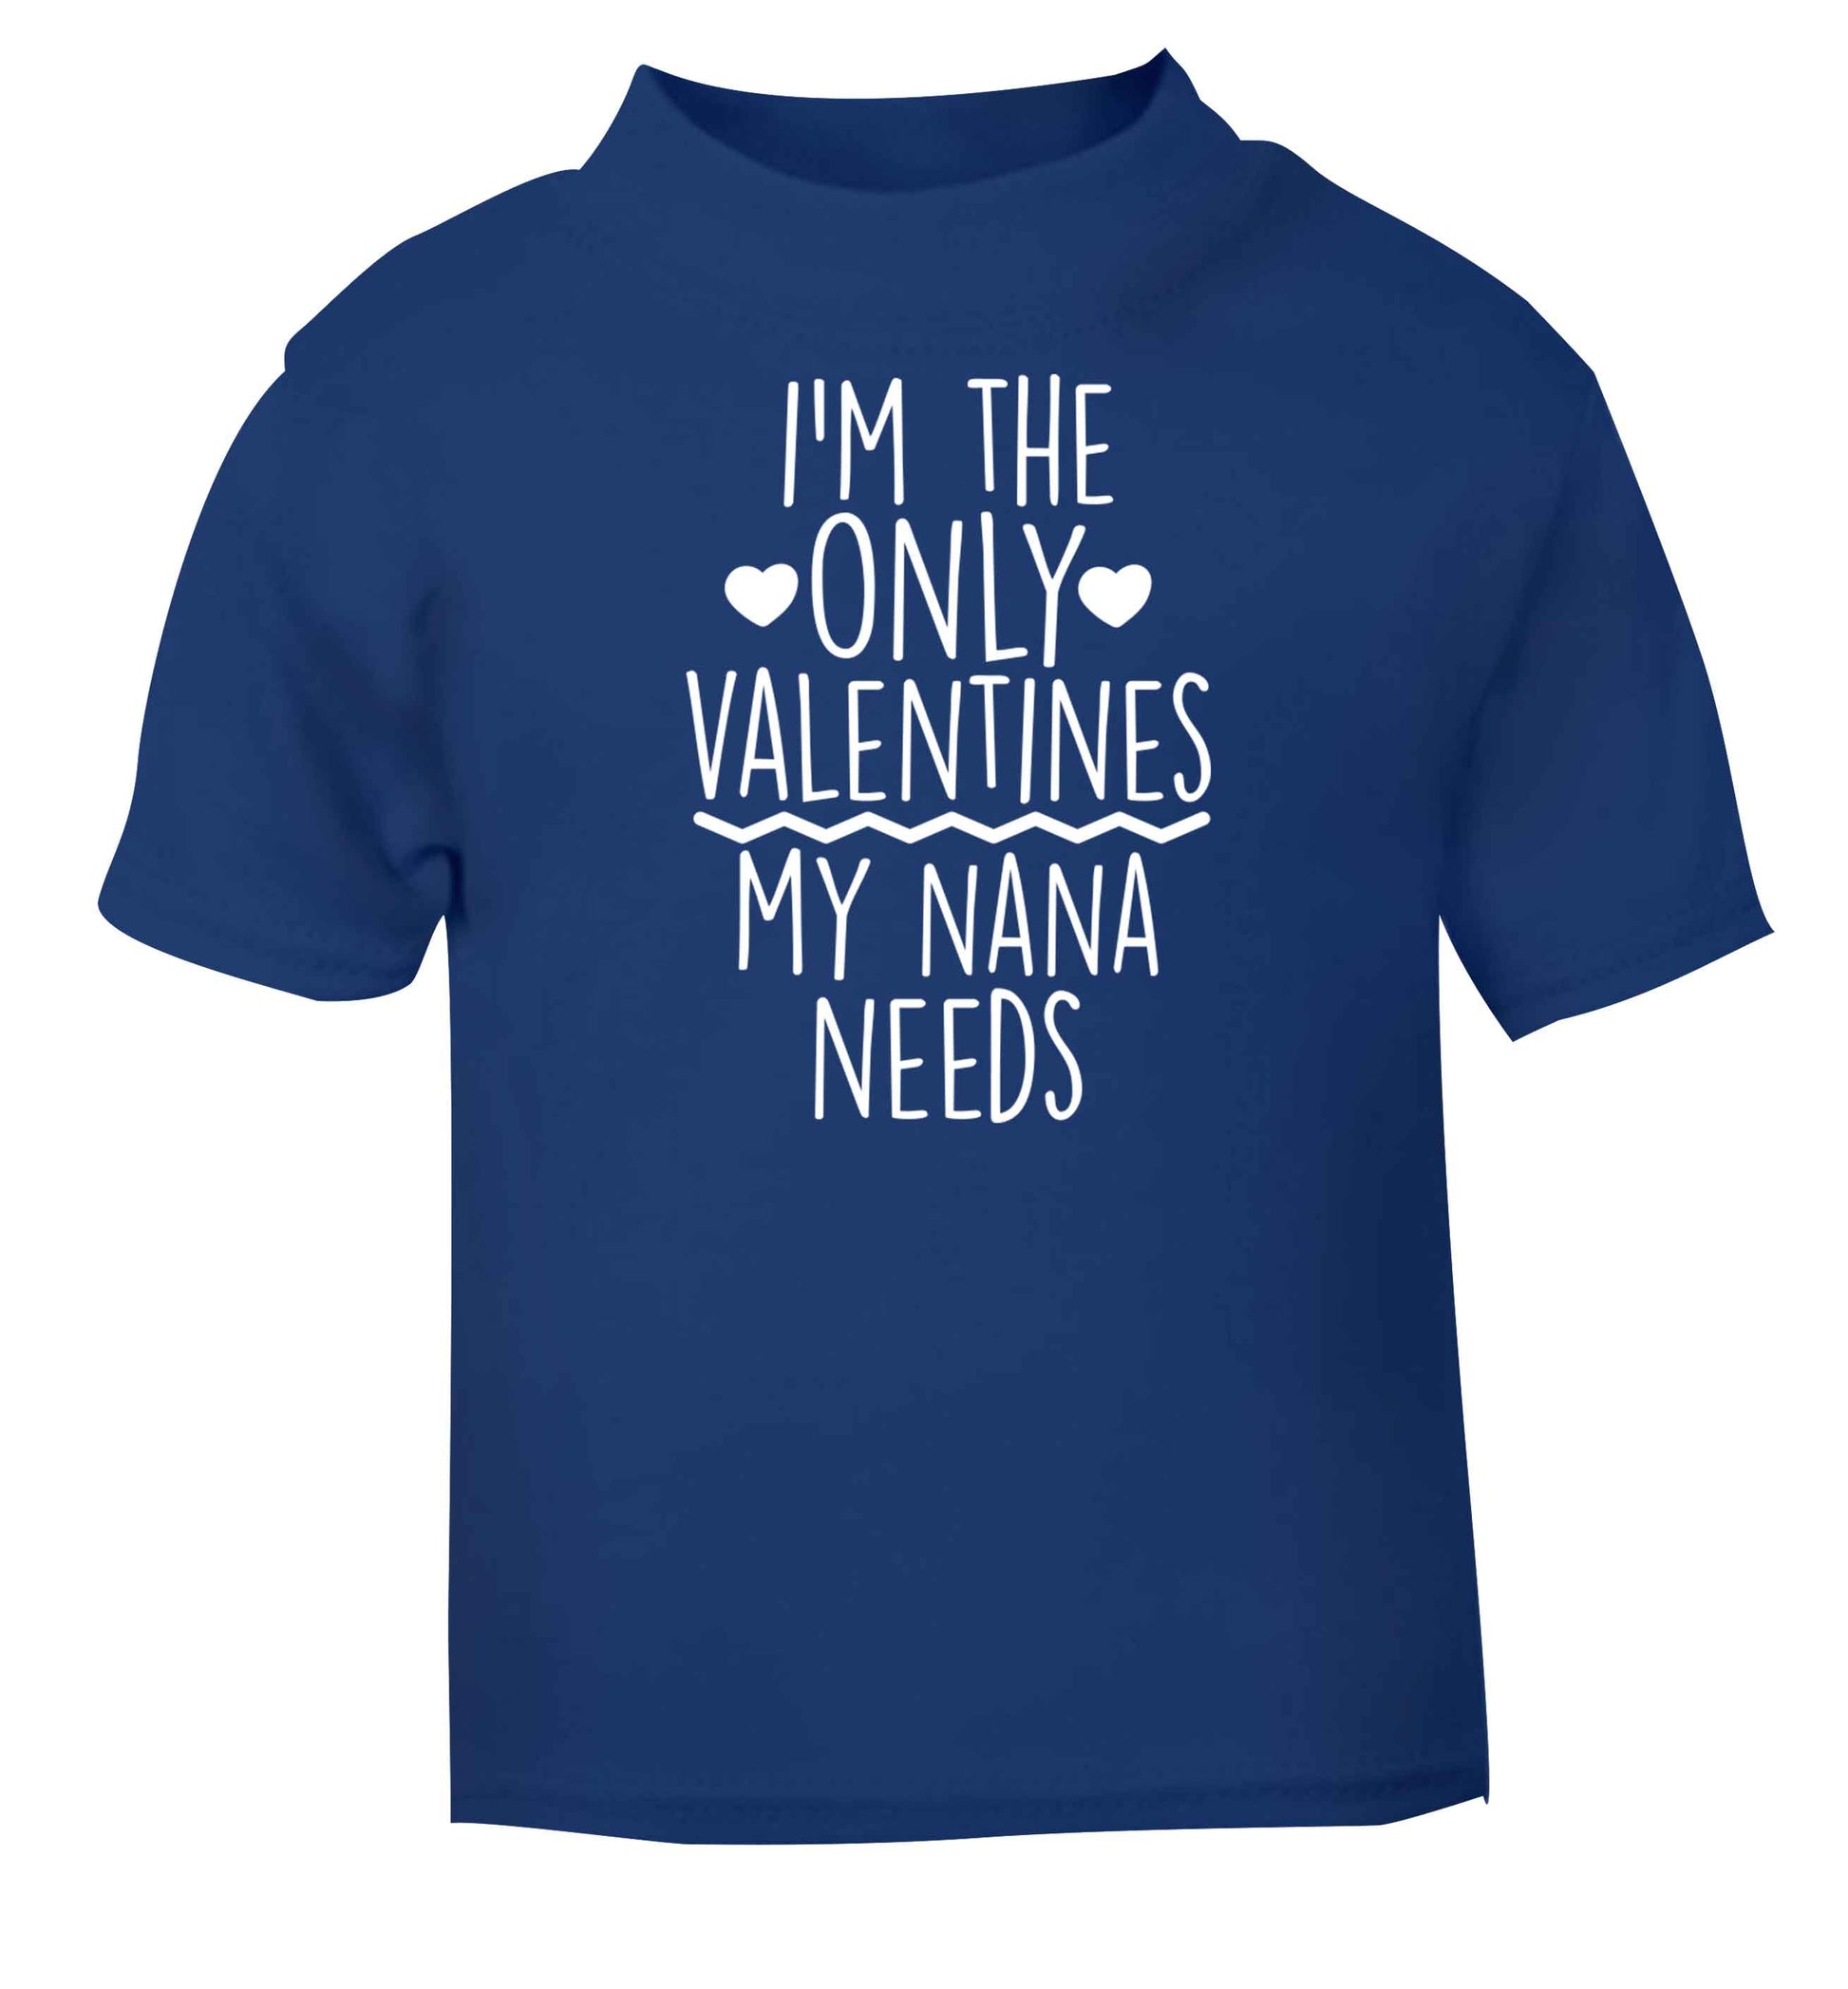 I'm the only valentines my nana needs blue baby toddler Tshirt 2 Years